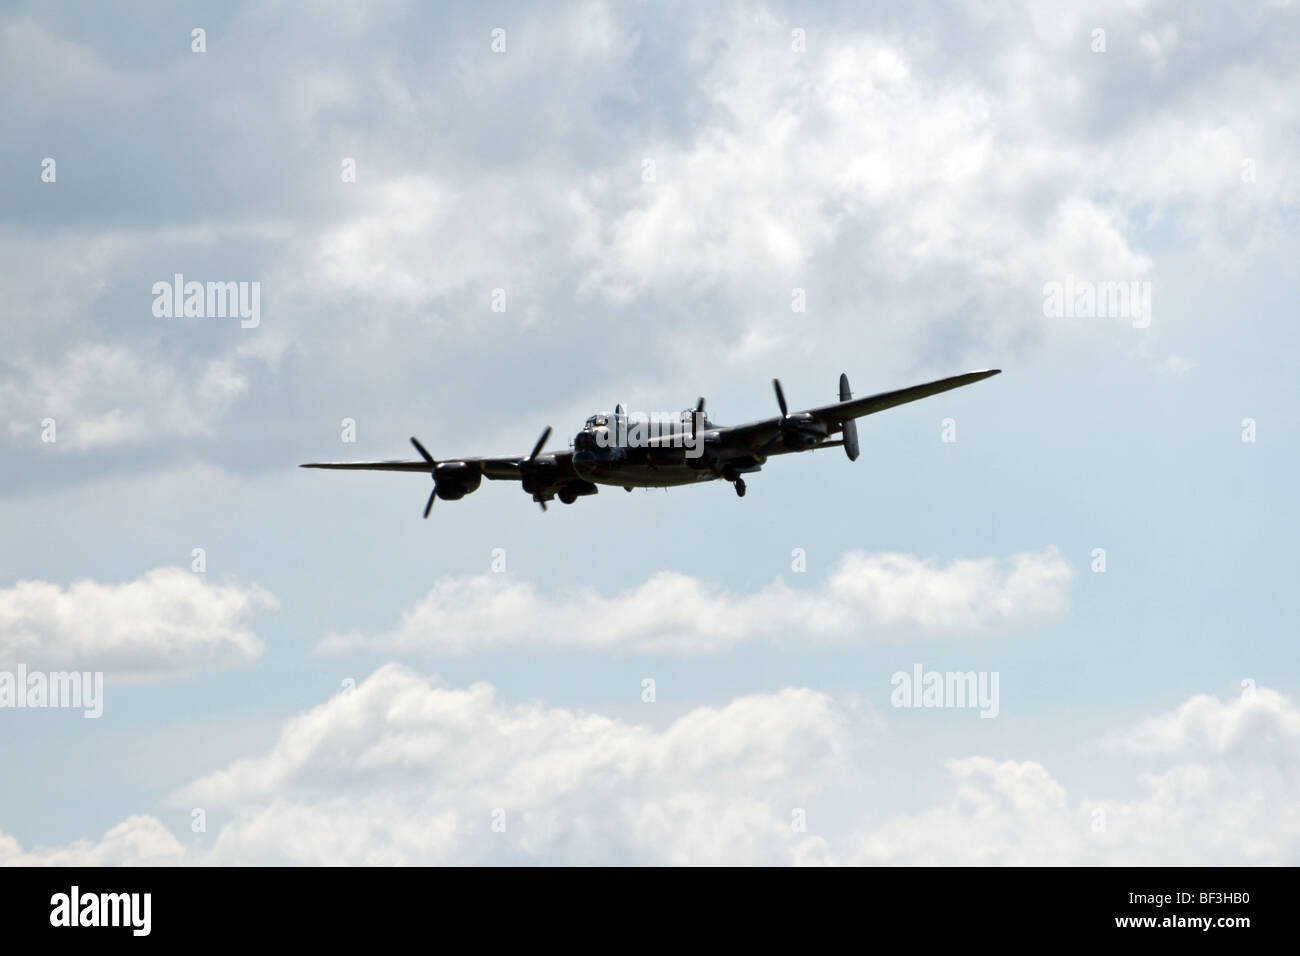 The famous Avro Lancaster Bomber  which was built by Avro a British aircraft manufacturer. Stock Photo